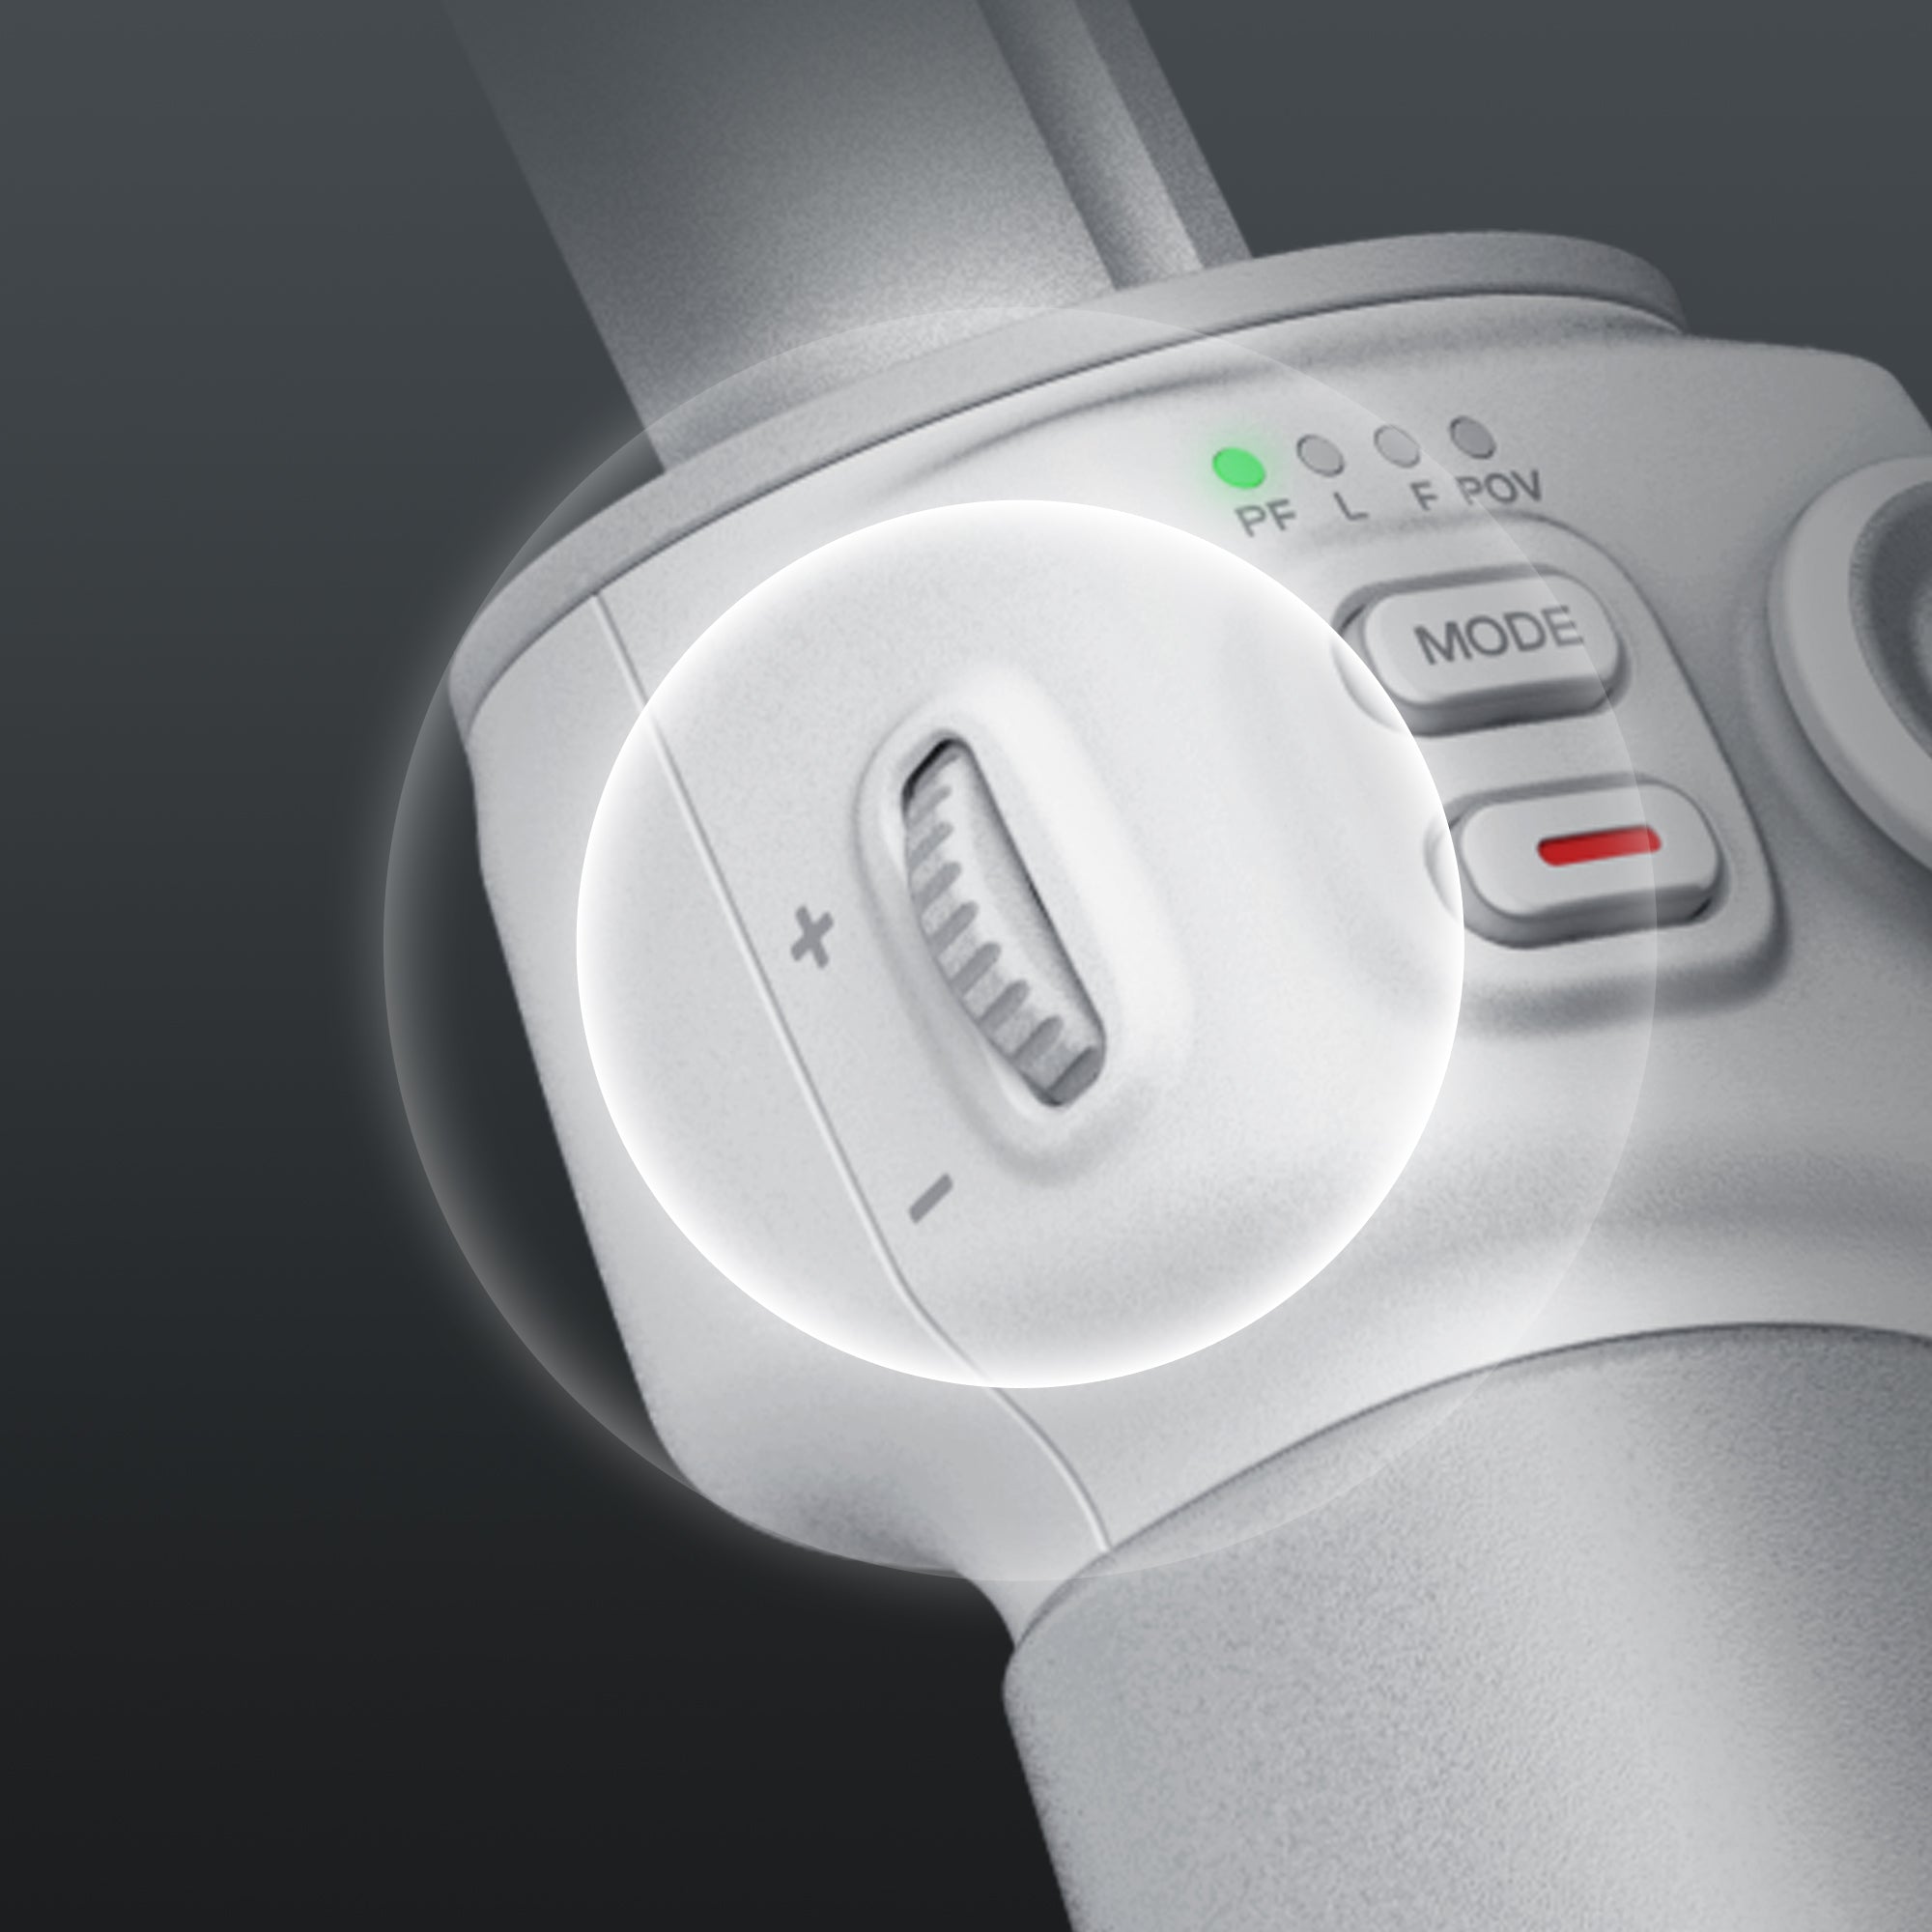 One-hand operation becomes simpler with the multi-functional control wheel.